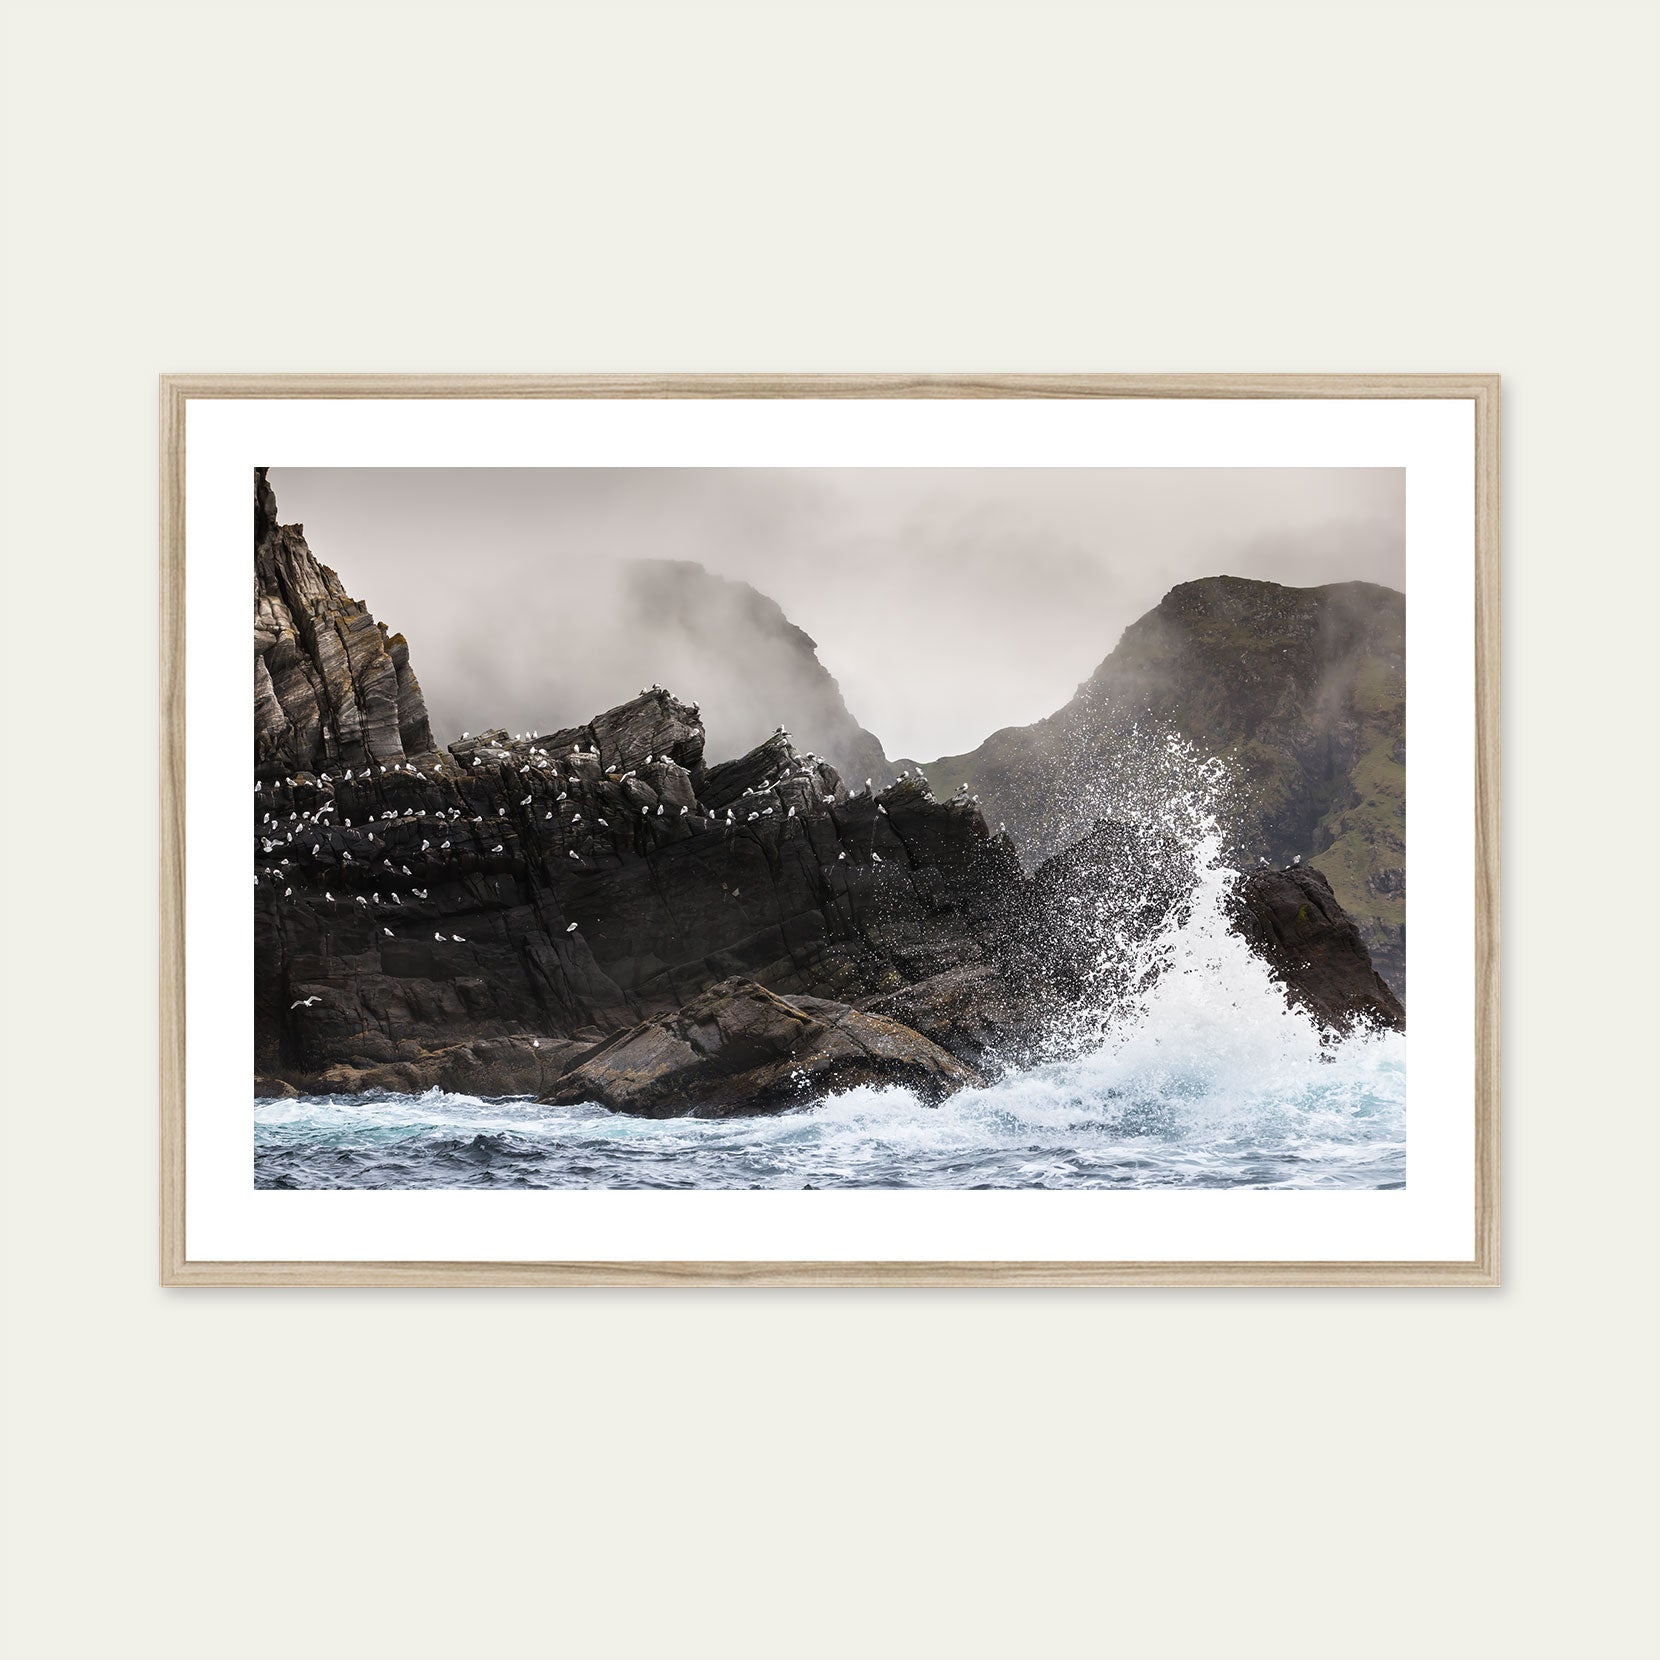 A wood framed print of a rough and rugged coast in Norway